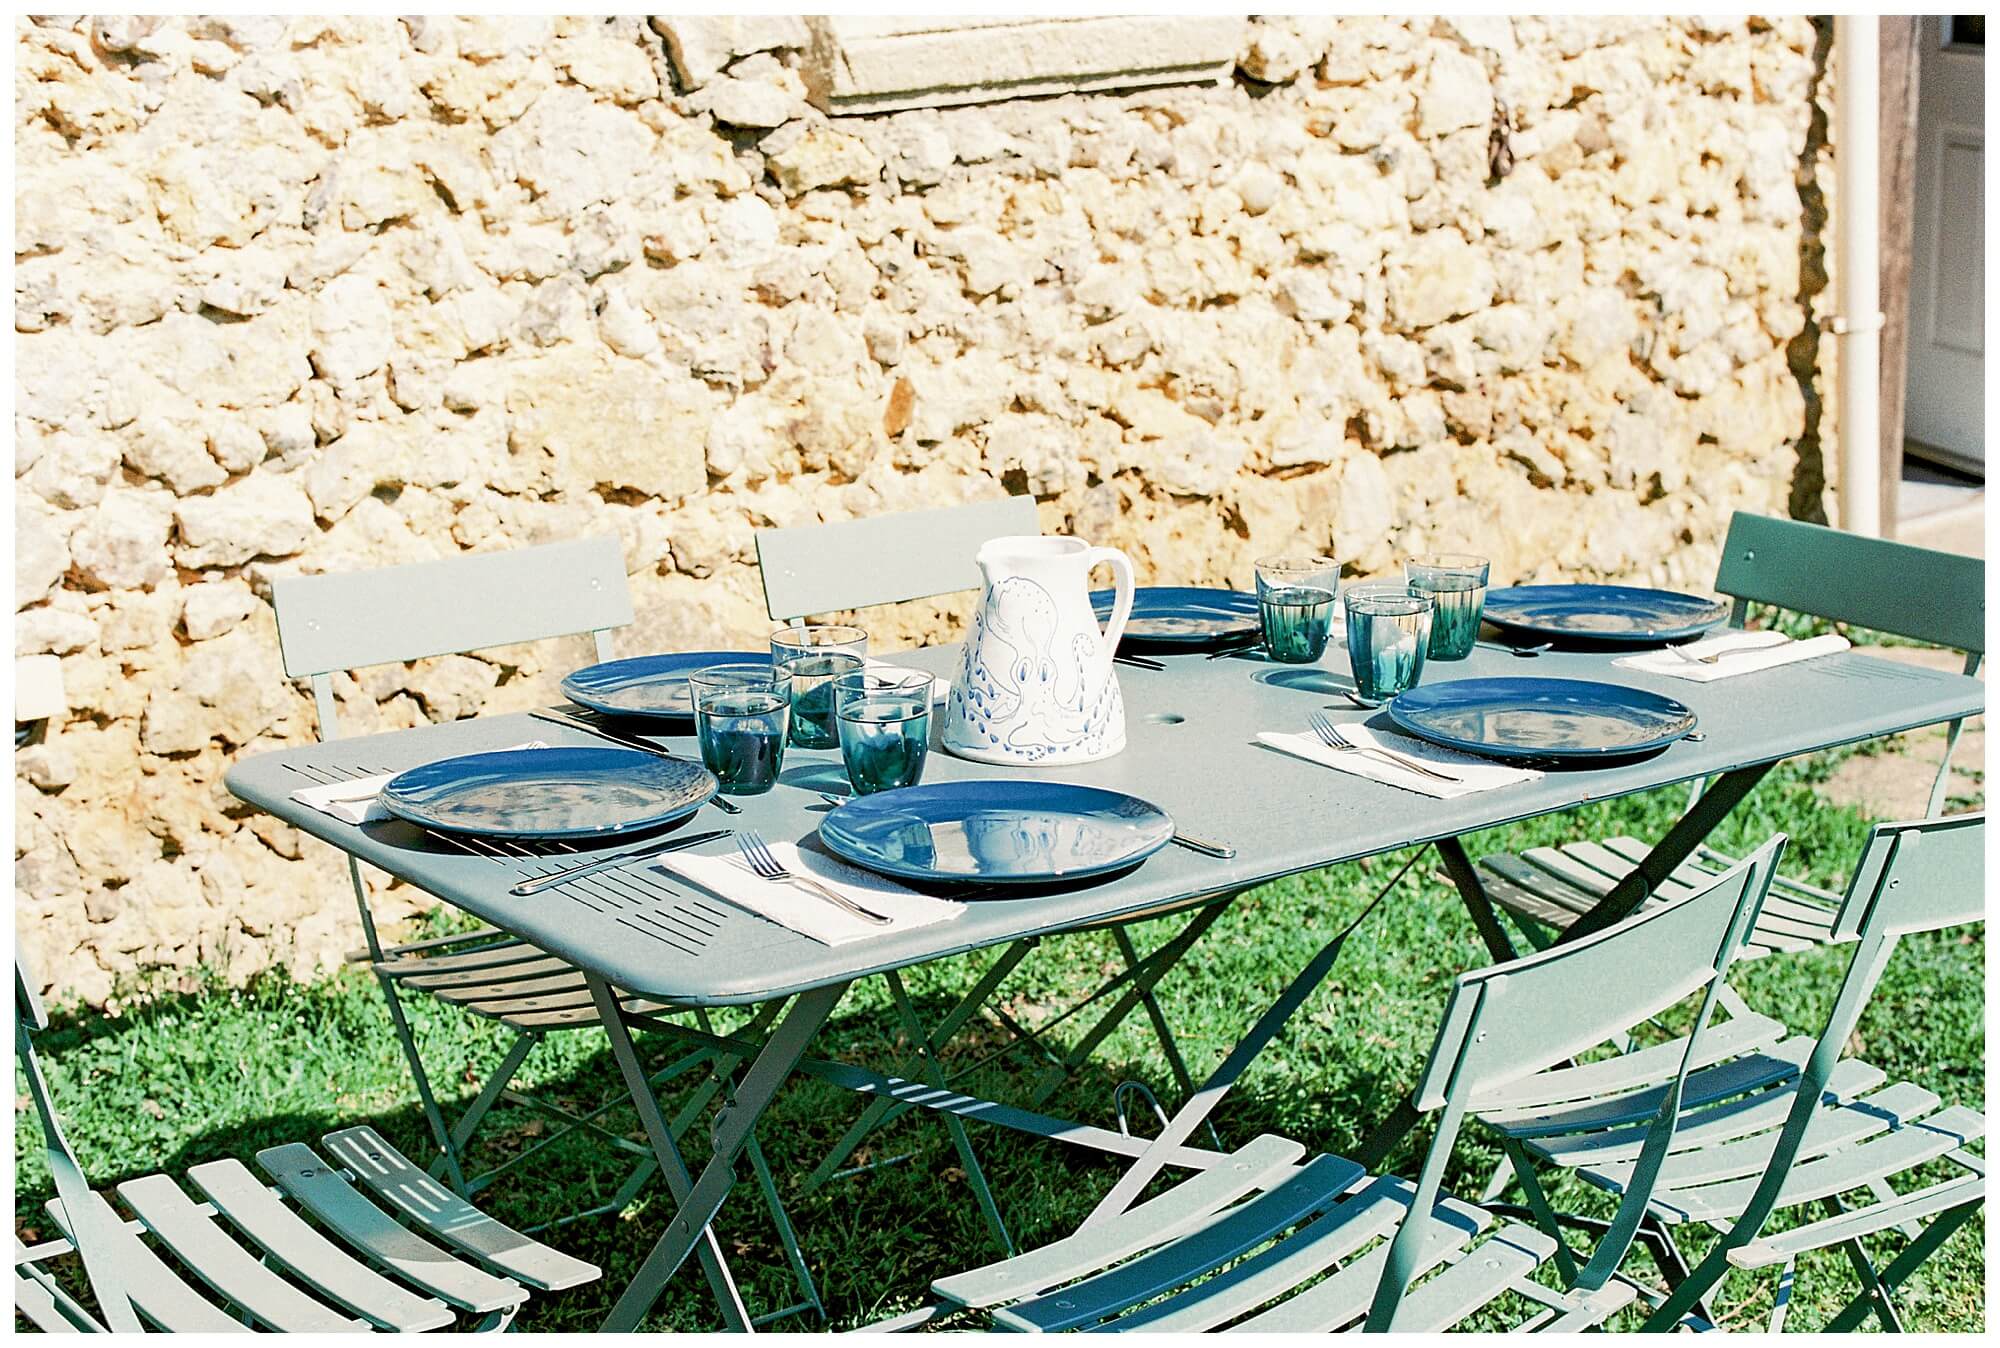 Full sun shines on the stone French country cottage and the garden table set for lunch.